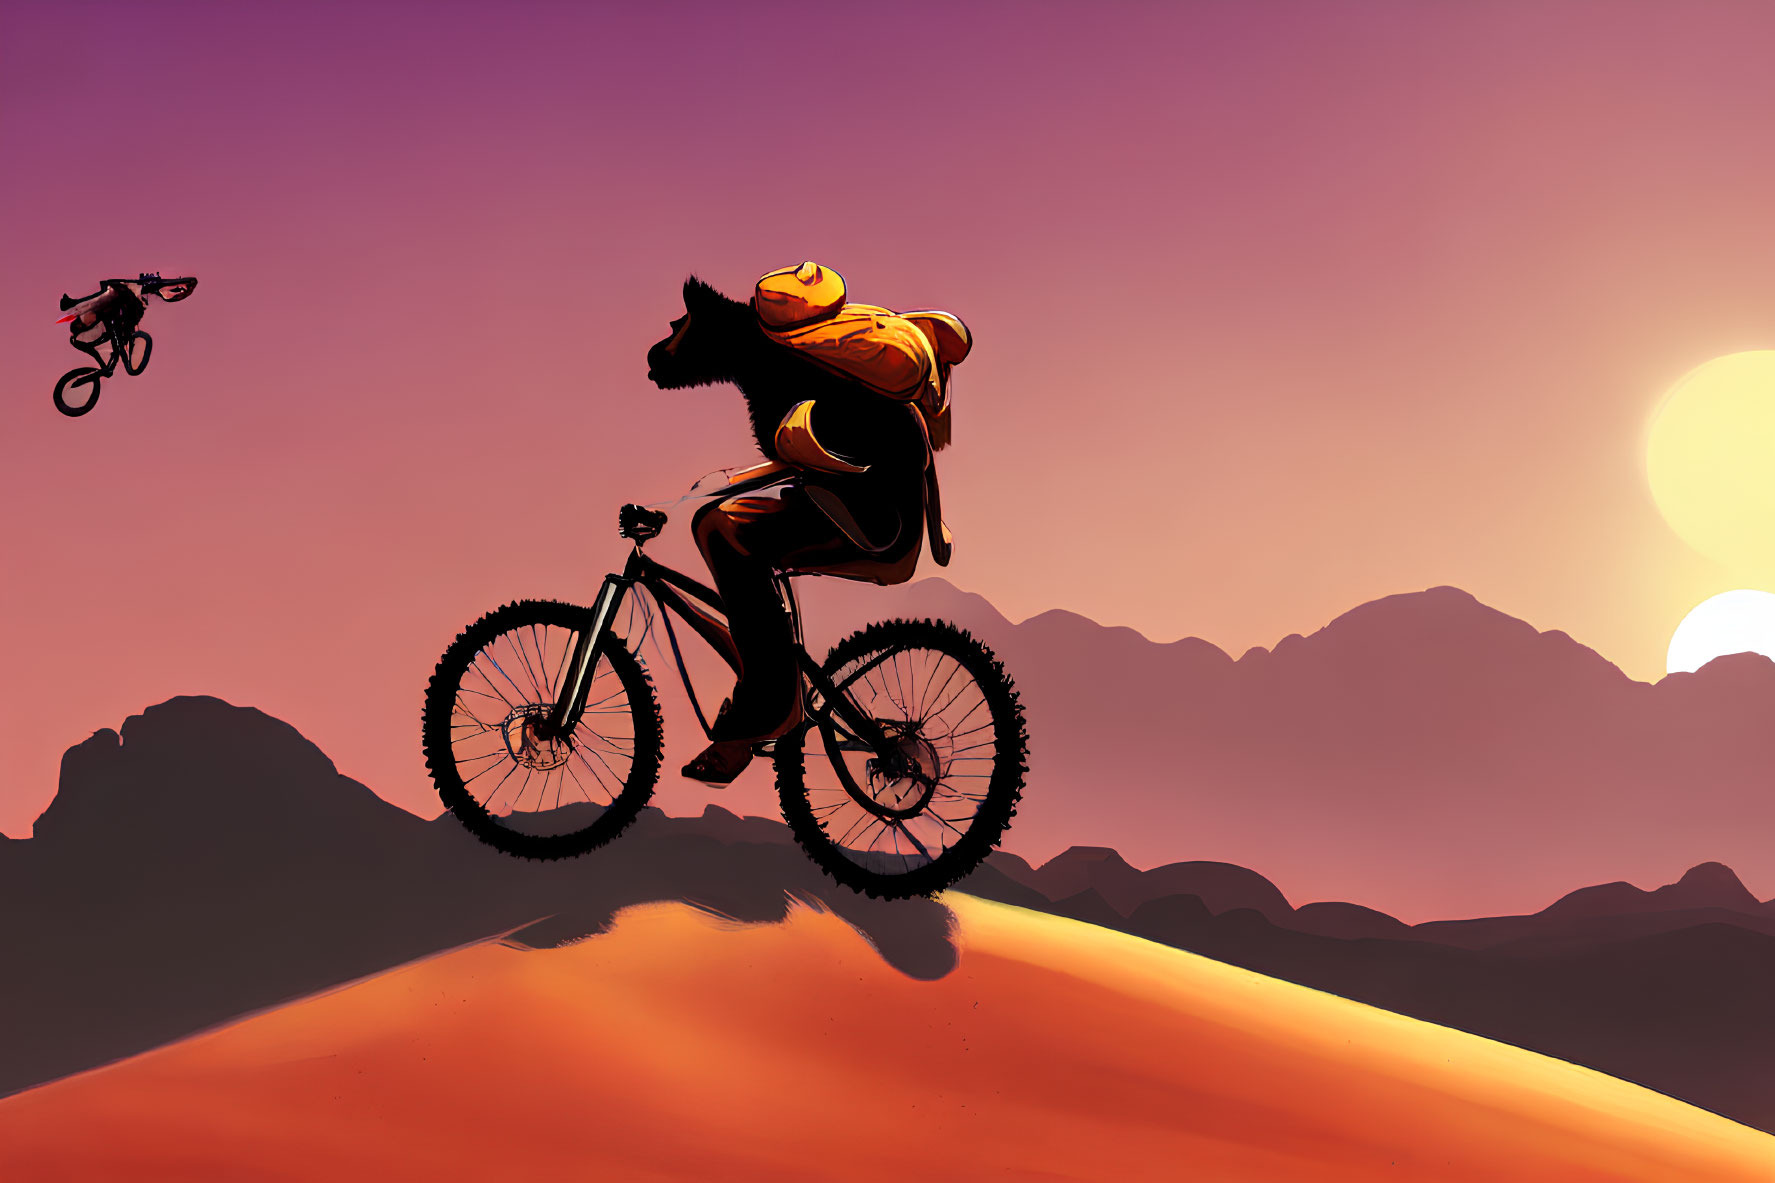 Cyclists performing jumps on desert dune at dramatic sunset.